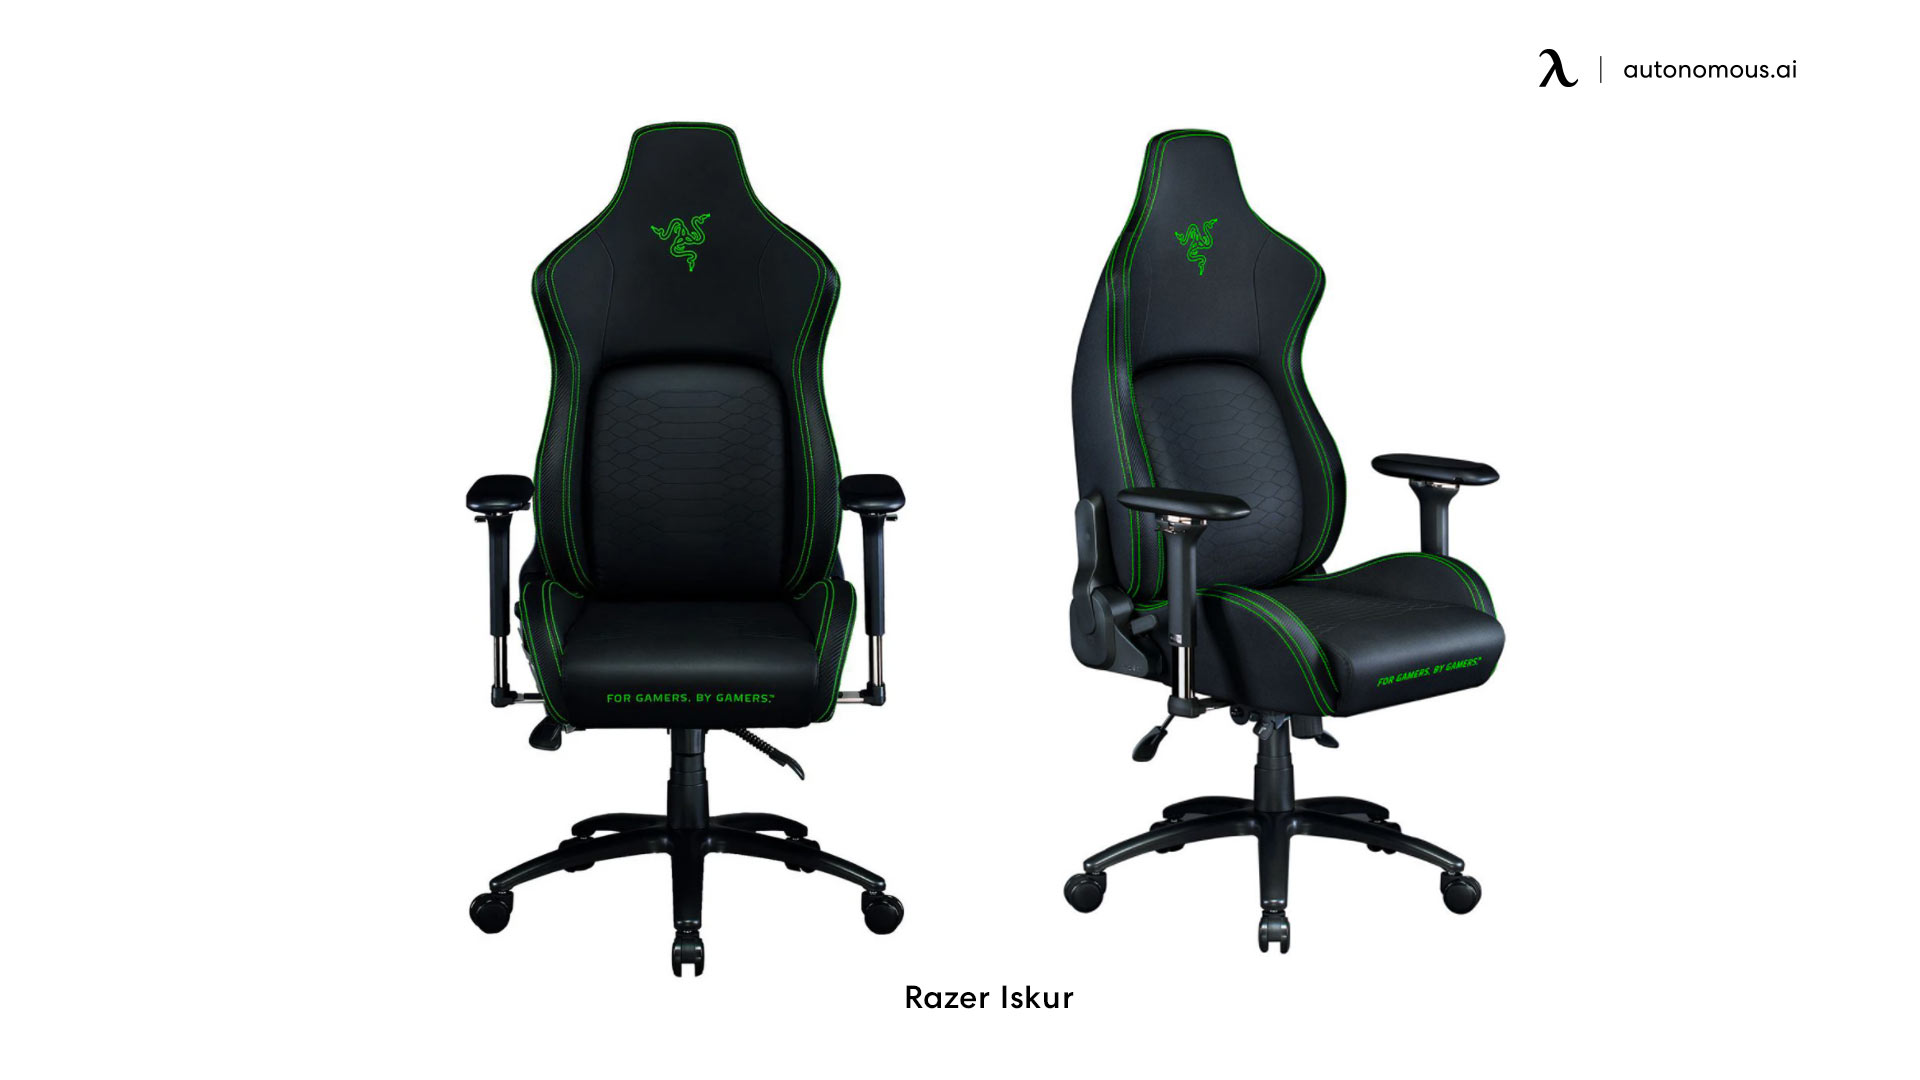 Razer Iskur leather gaming chair